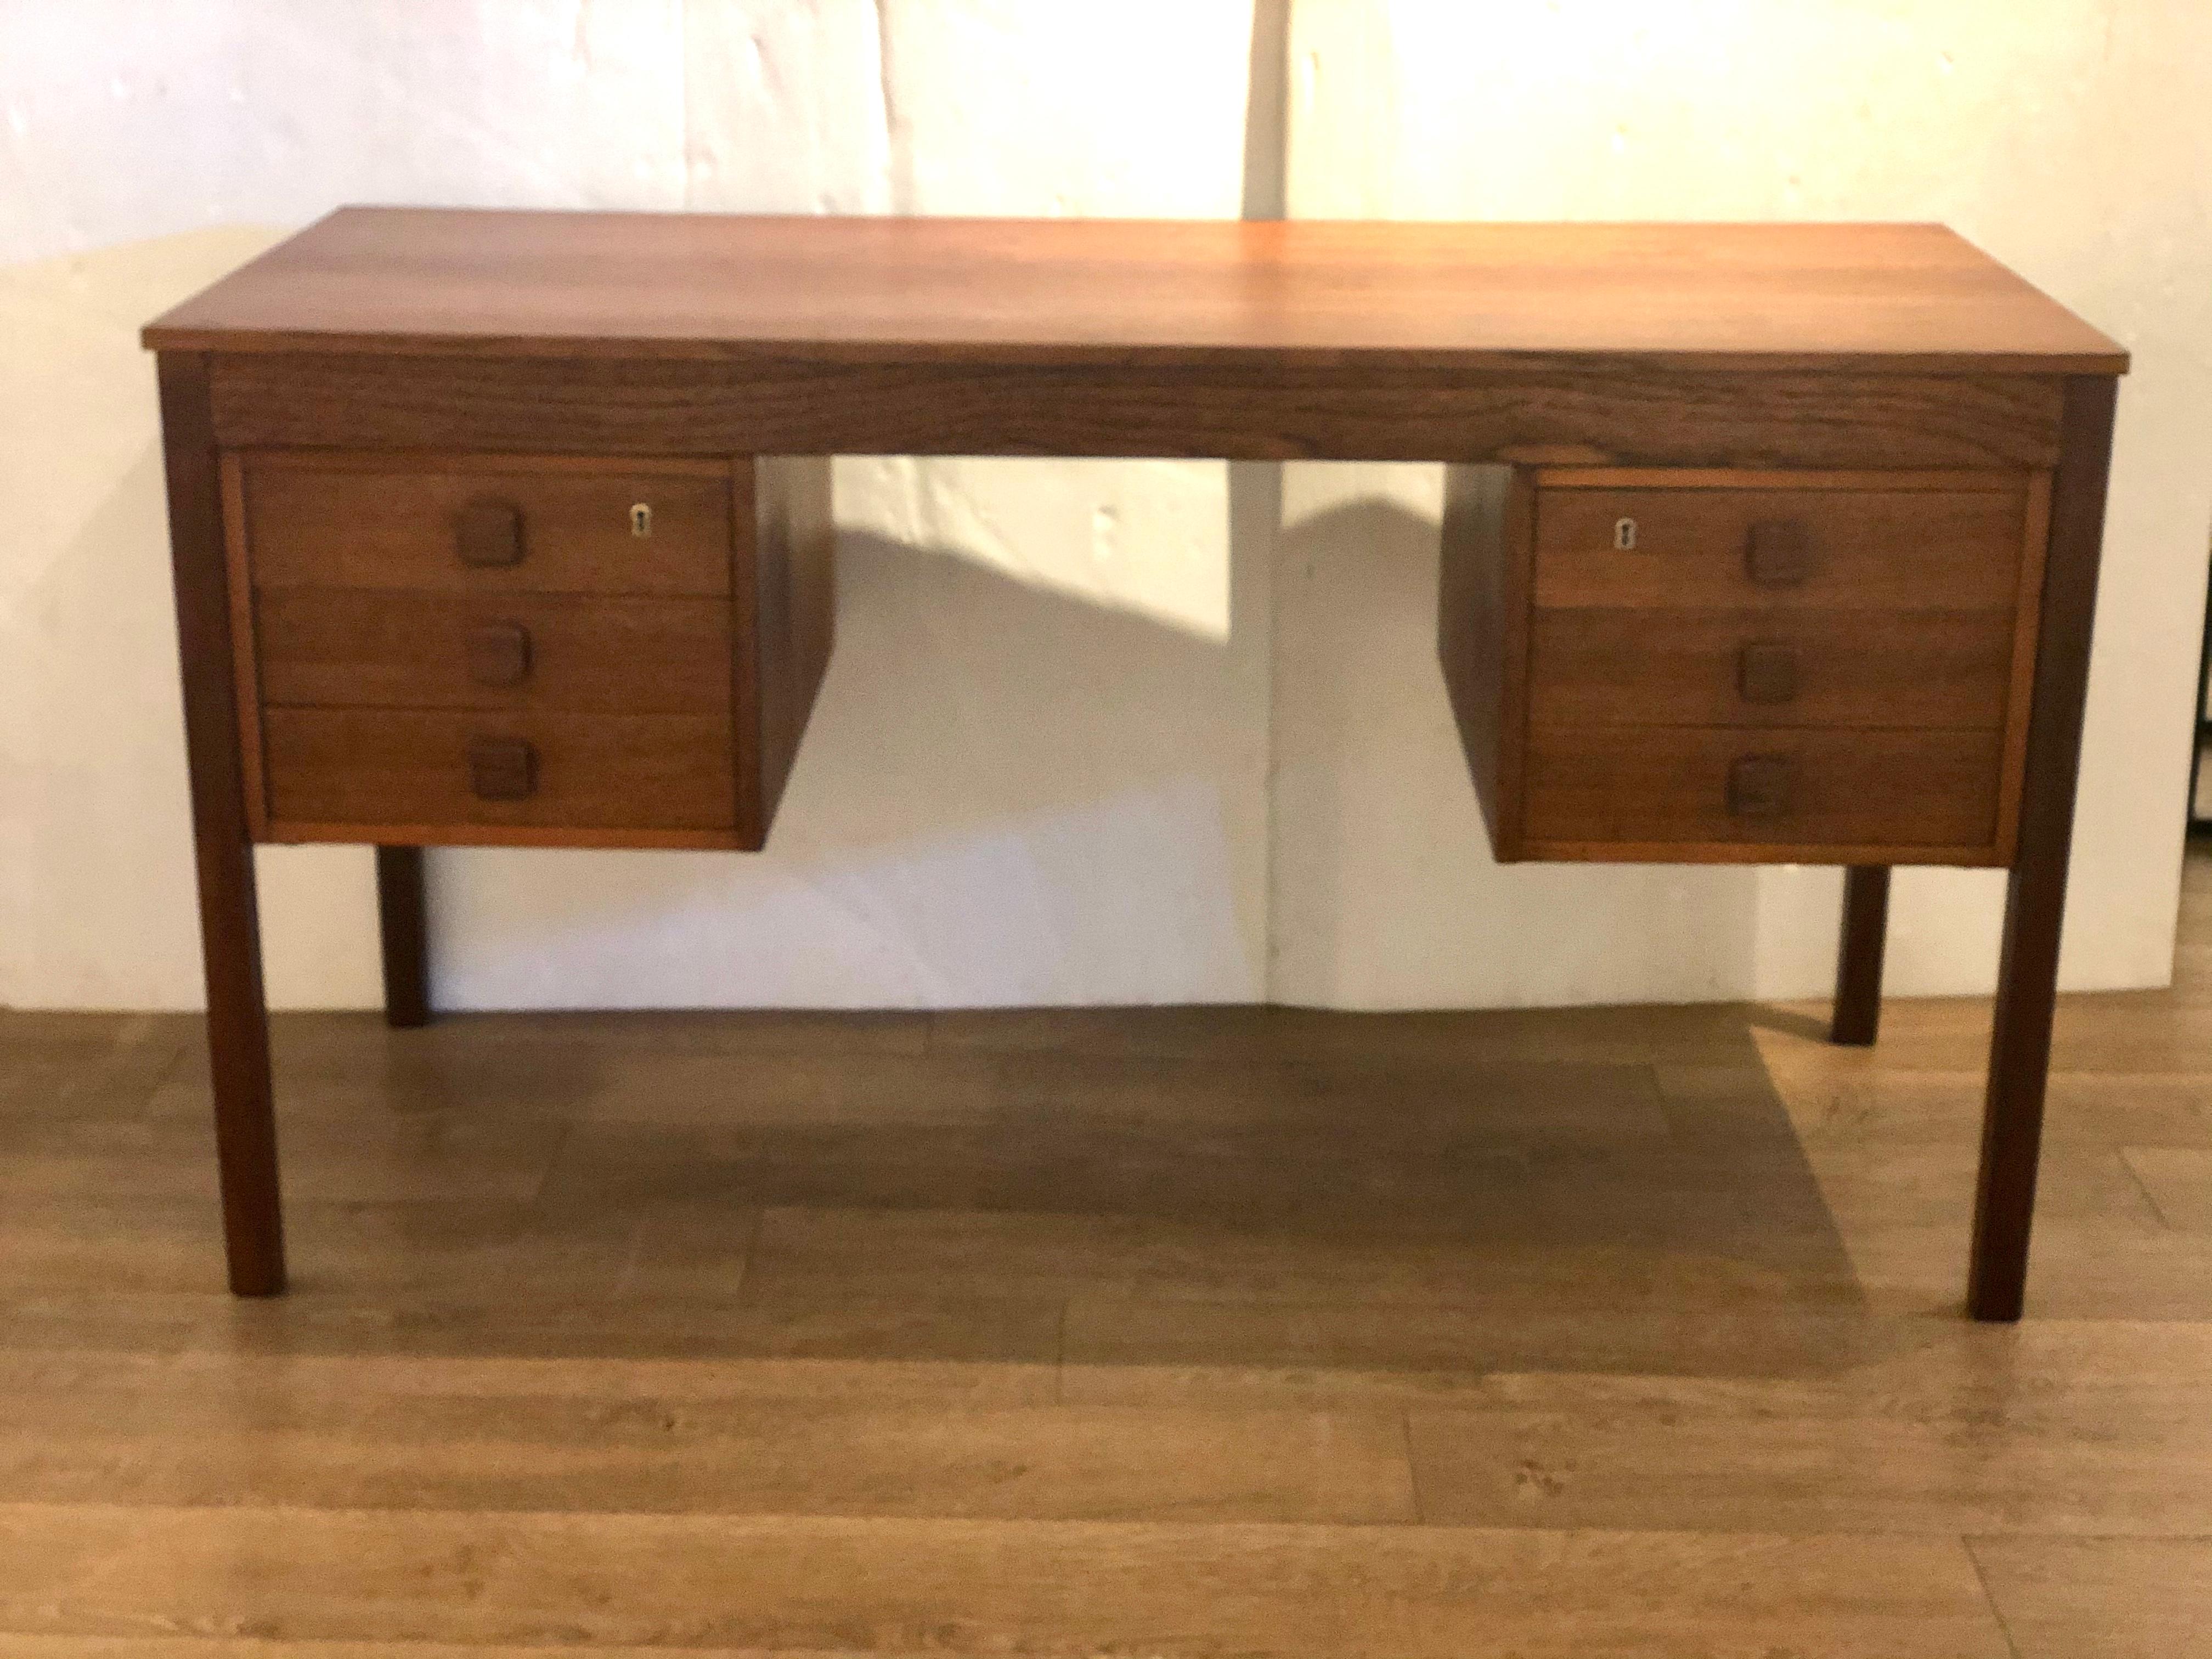 Simple elegant Danish teak desk circa 1970s, freshly refinished, with six drawers there is a key slot but the key its missing, versatile and stylish. Finished on both sides.